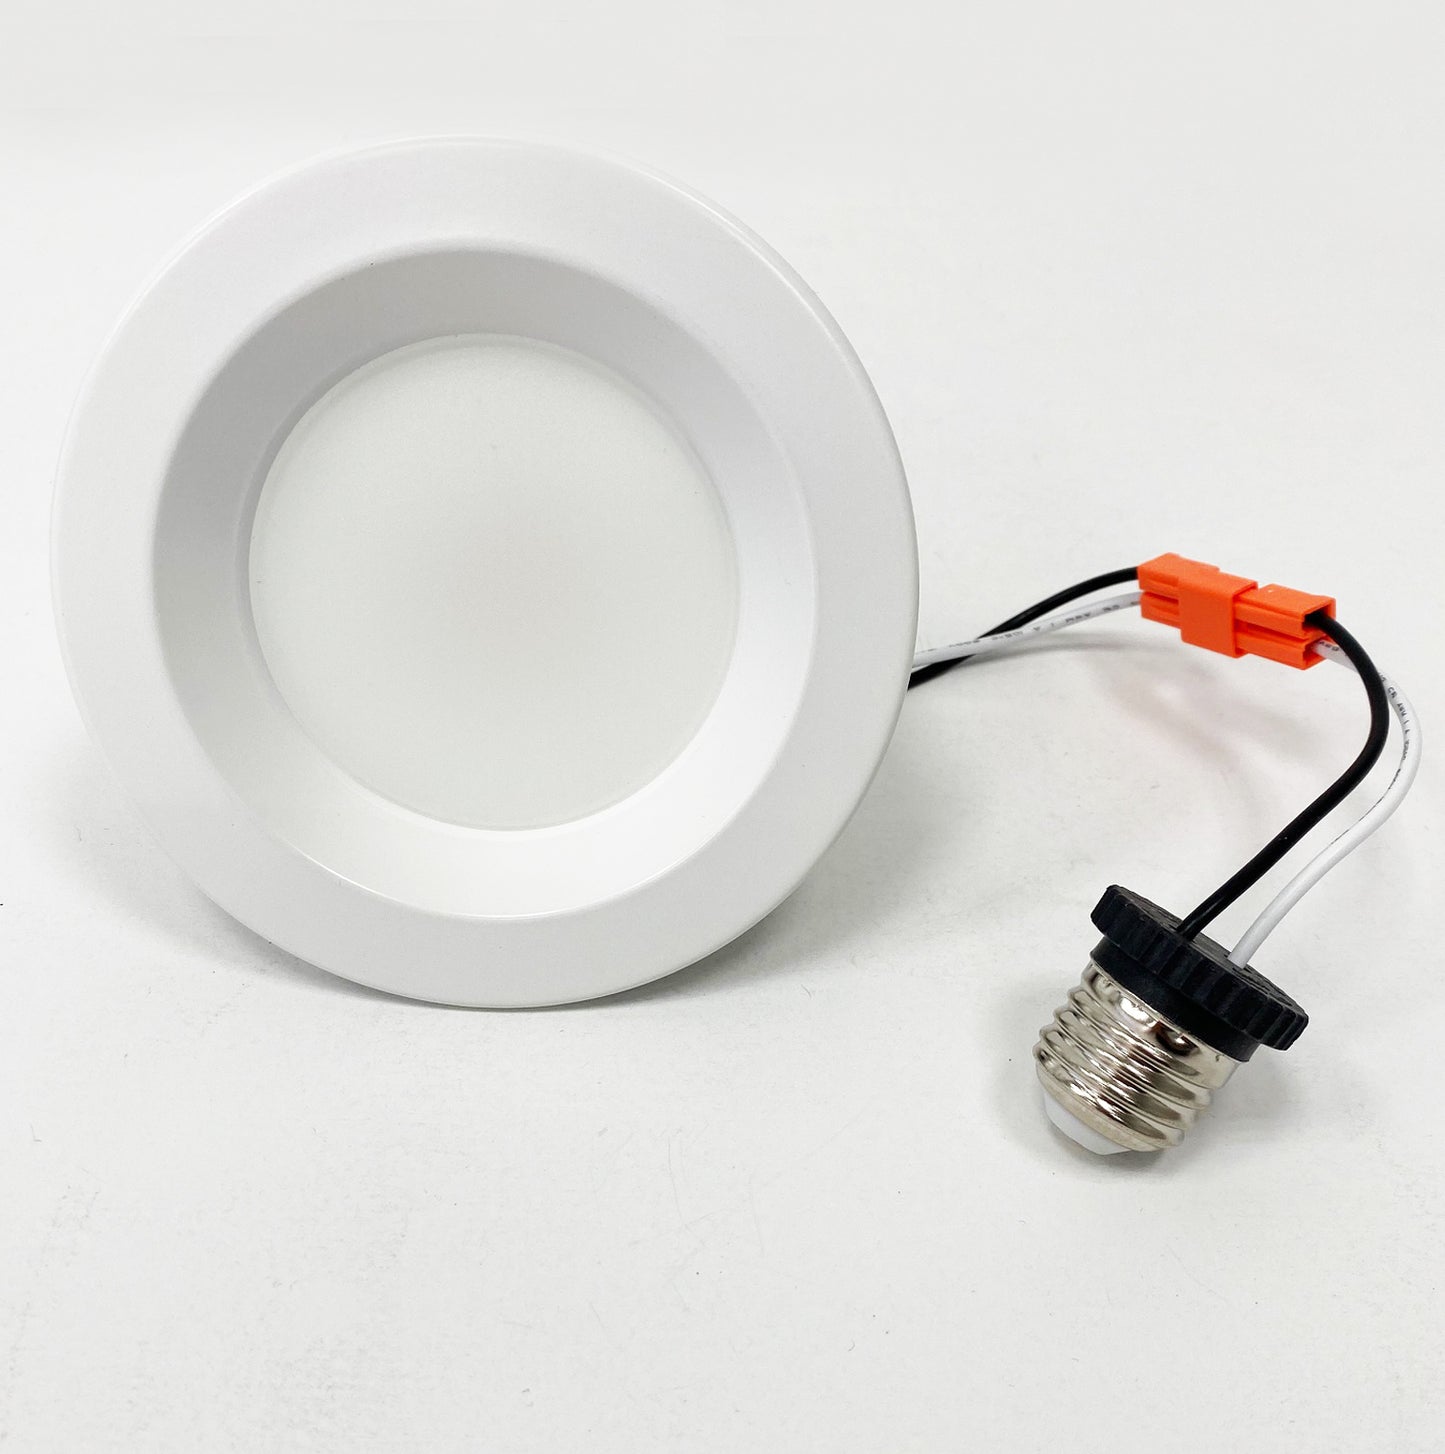 5CCT Led Recessed Light RETROFIT, Dimmable